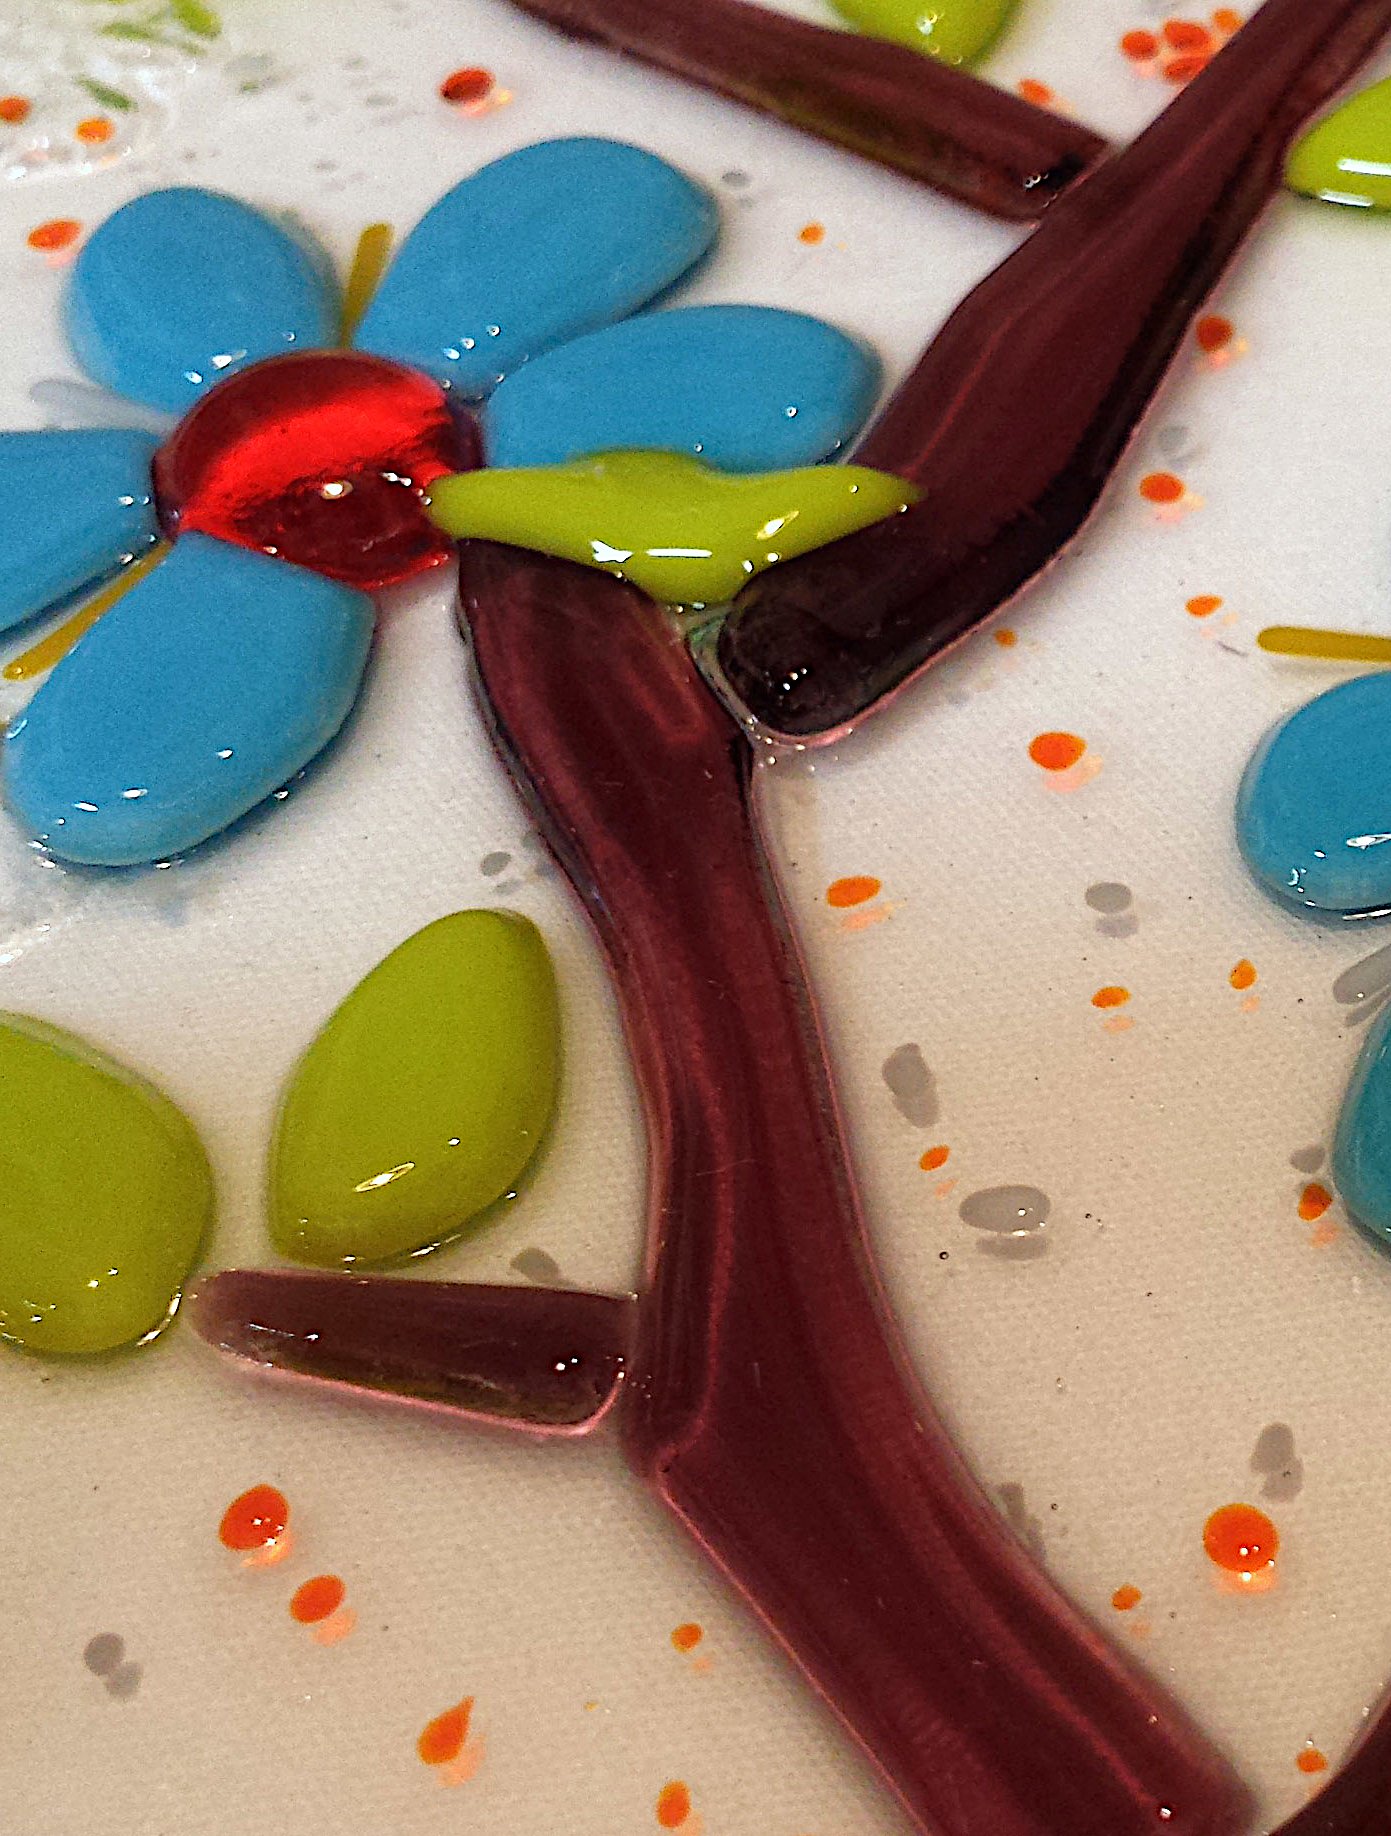 Fused glass: close up image of a window panel featuring a botanical design of a dogwood flower